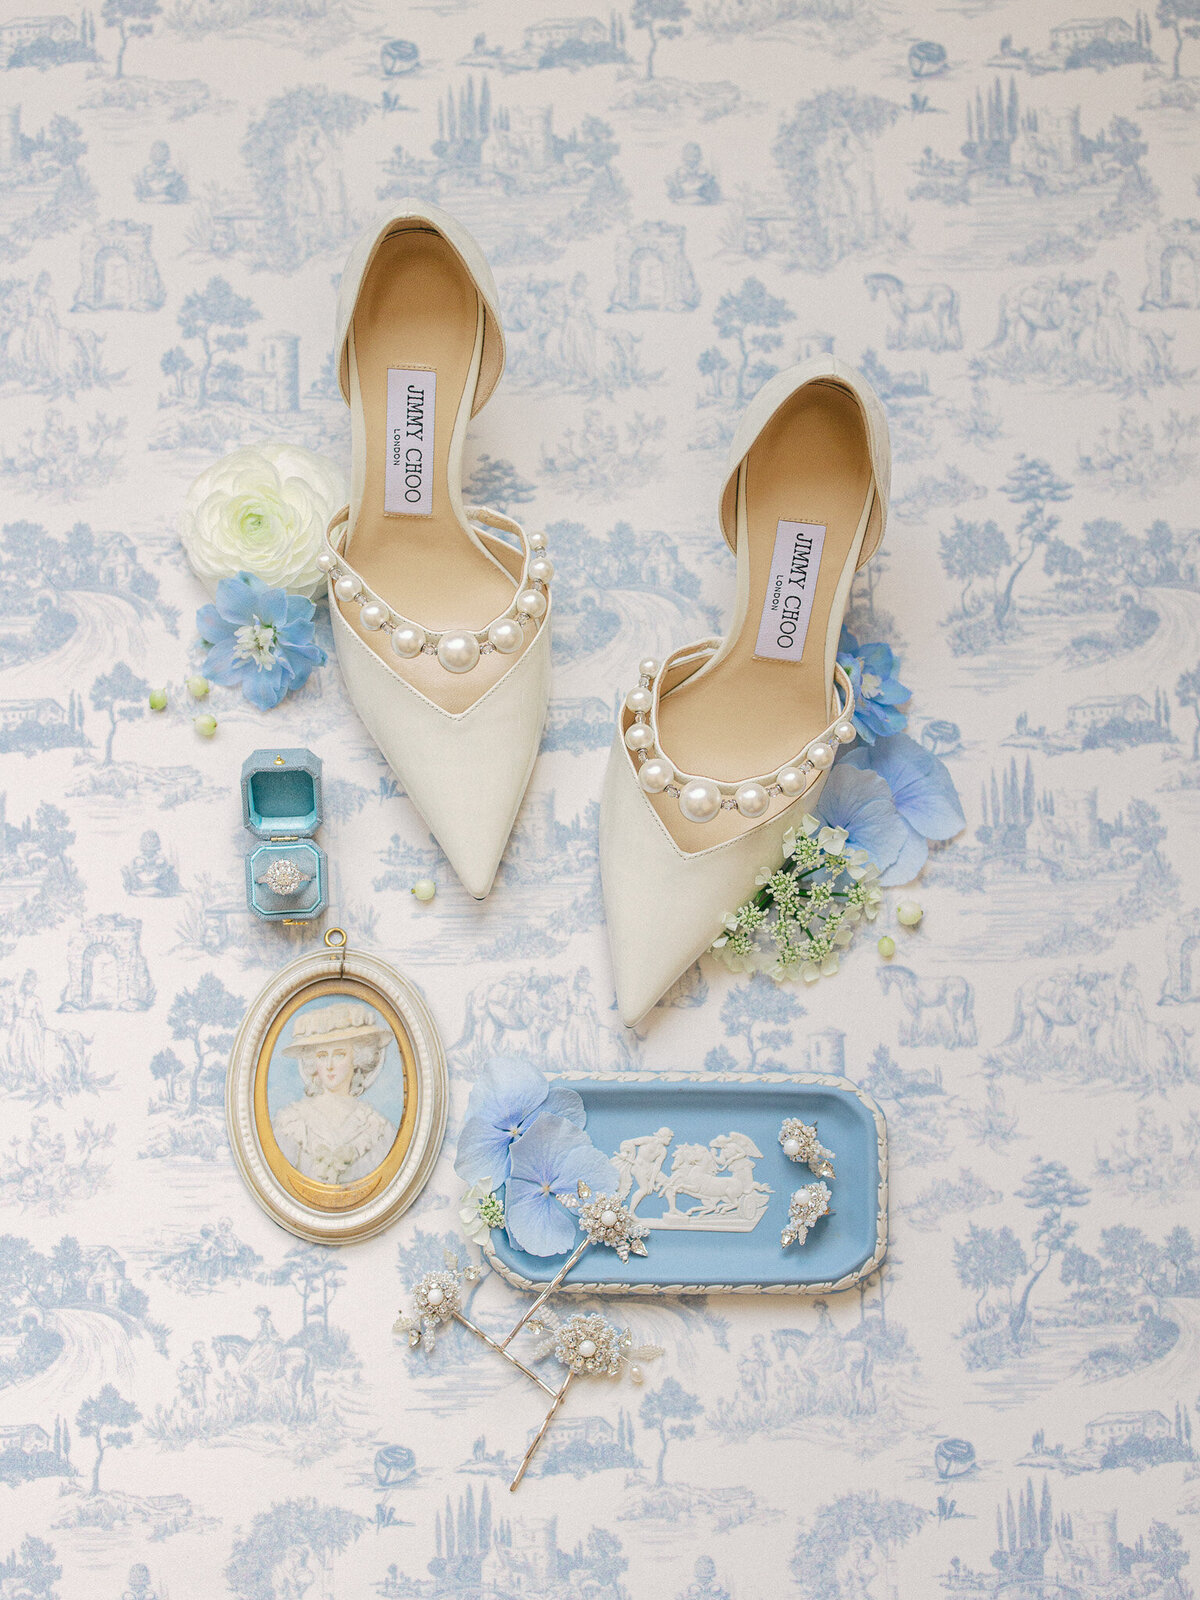 Flat lay of wedding shoes, earrings, and ring on a blue and white toile background with blue and white flowers